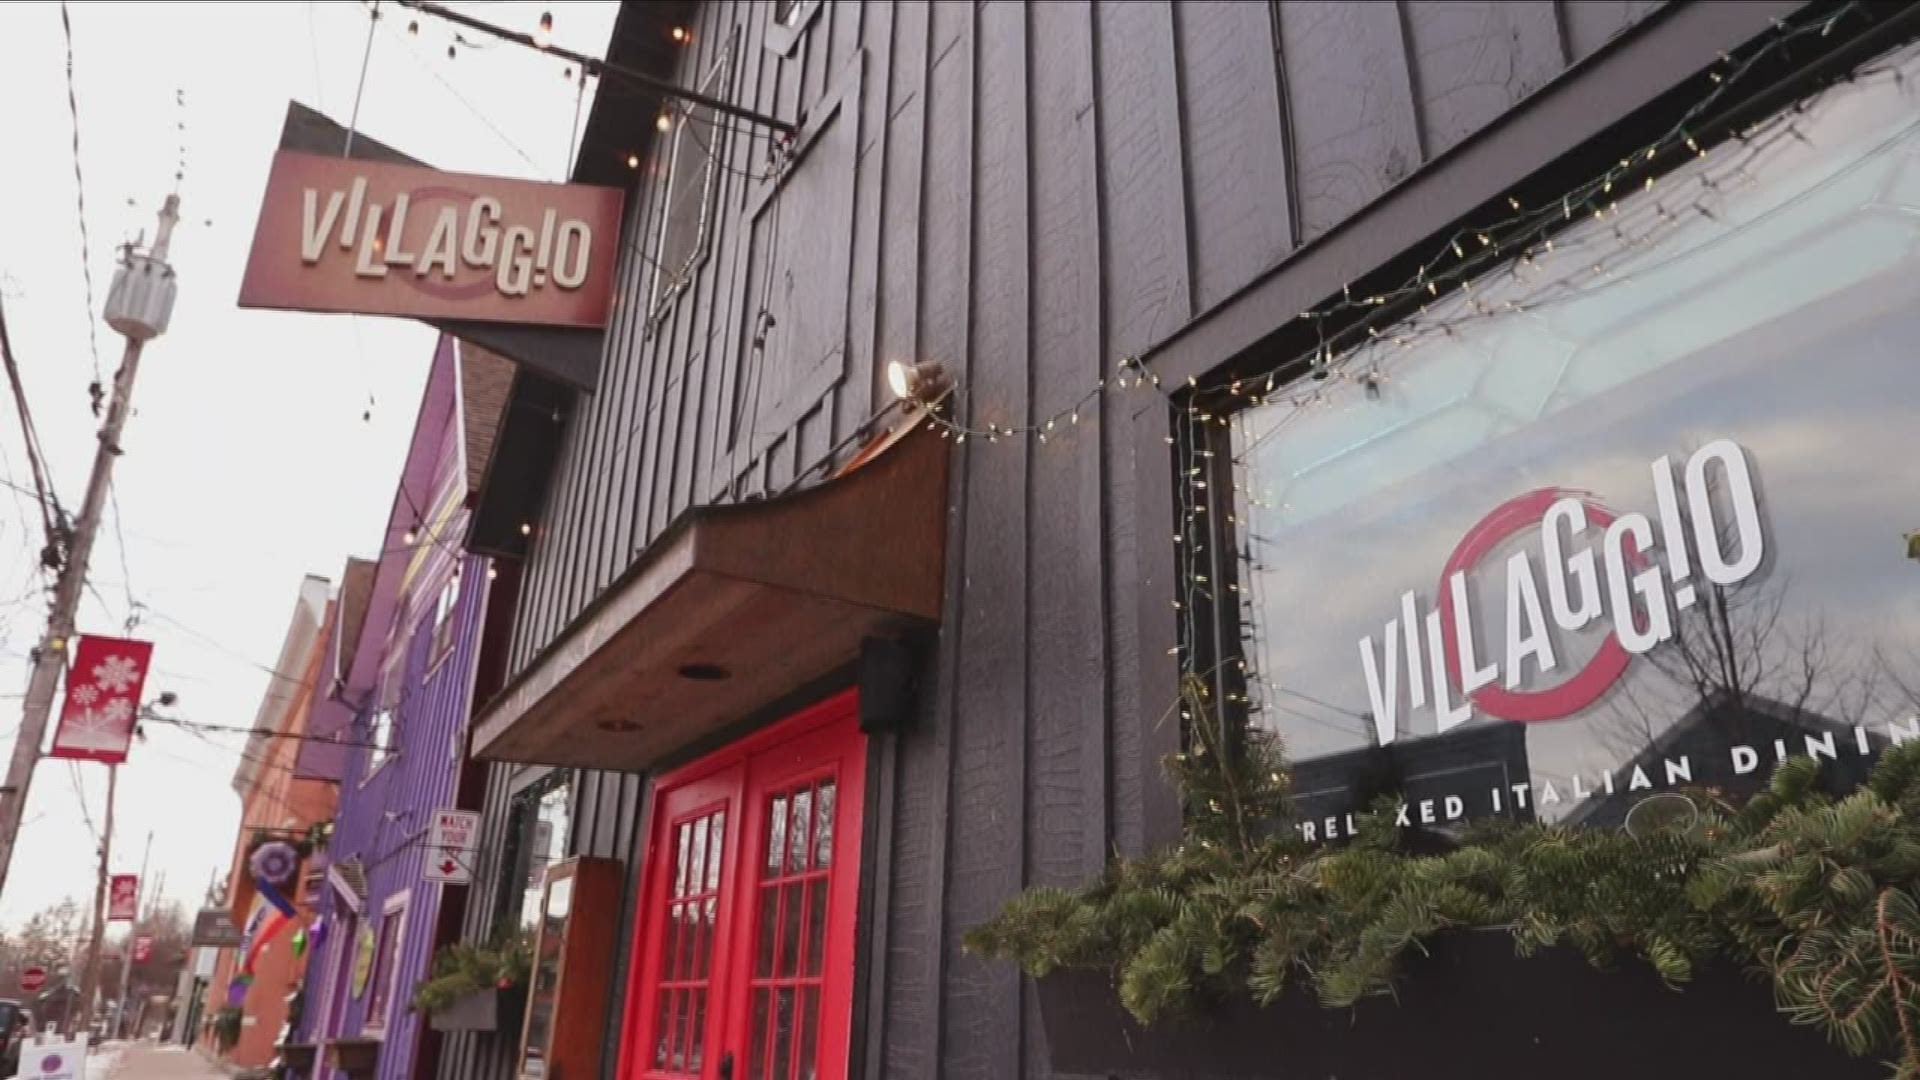 If you find yourself in Ellicottville you'll want to swing by Villaggio for some comfort food and local company.